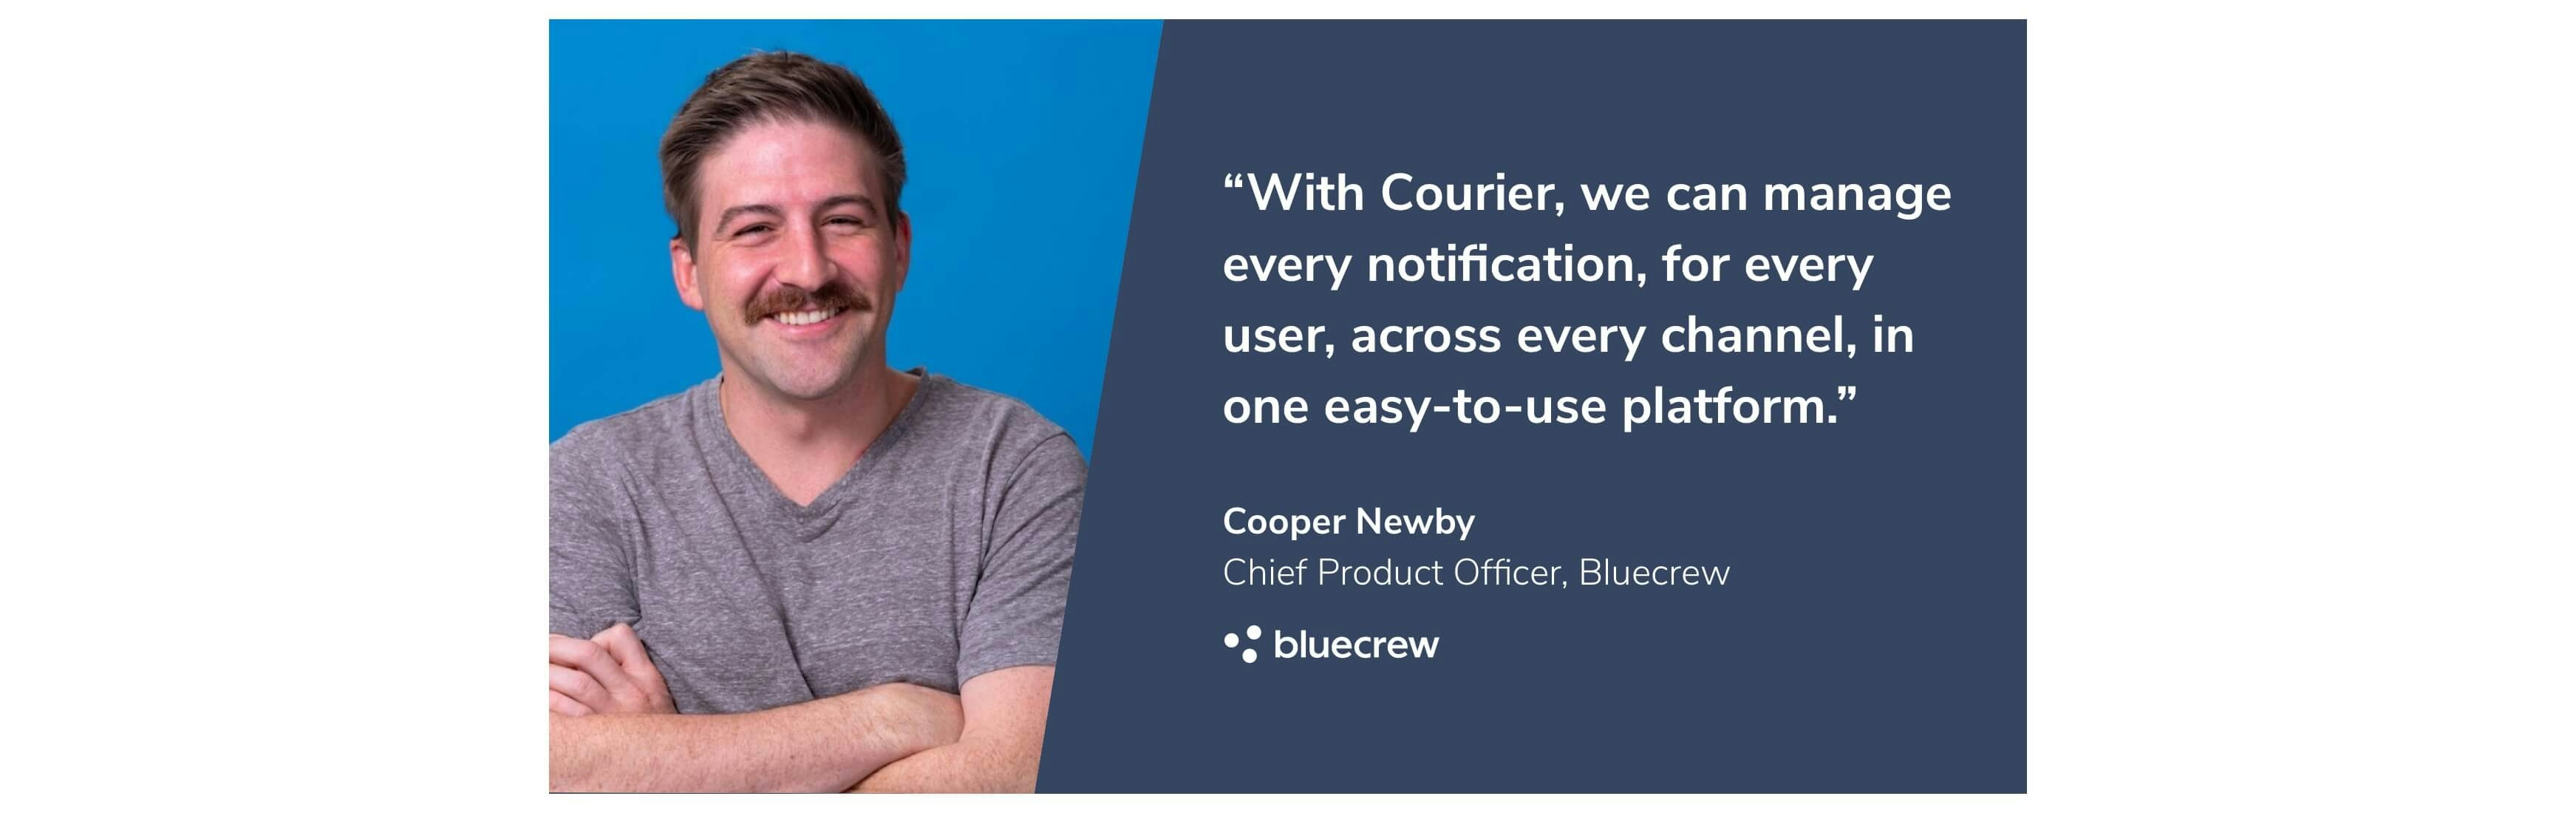 Customer Quote from Bluecrew's Chief Product Officer Cooper Newby